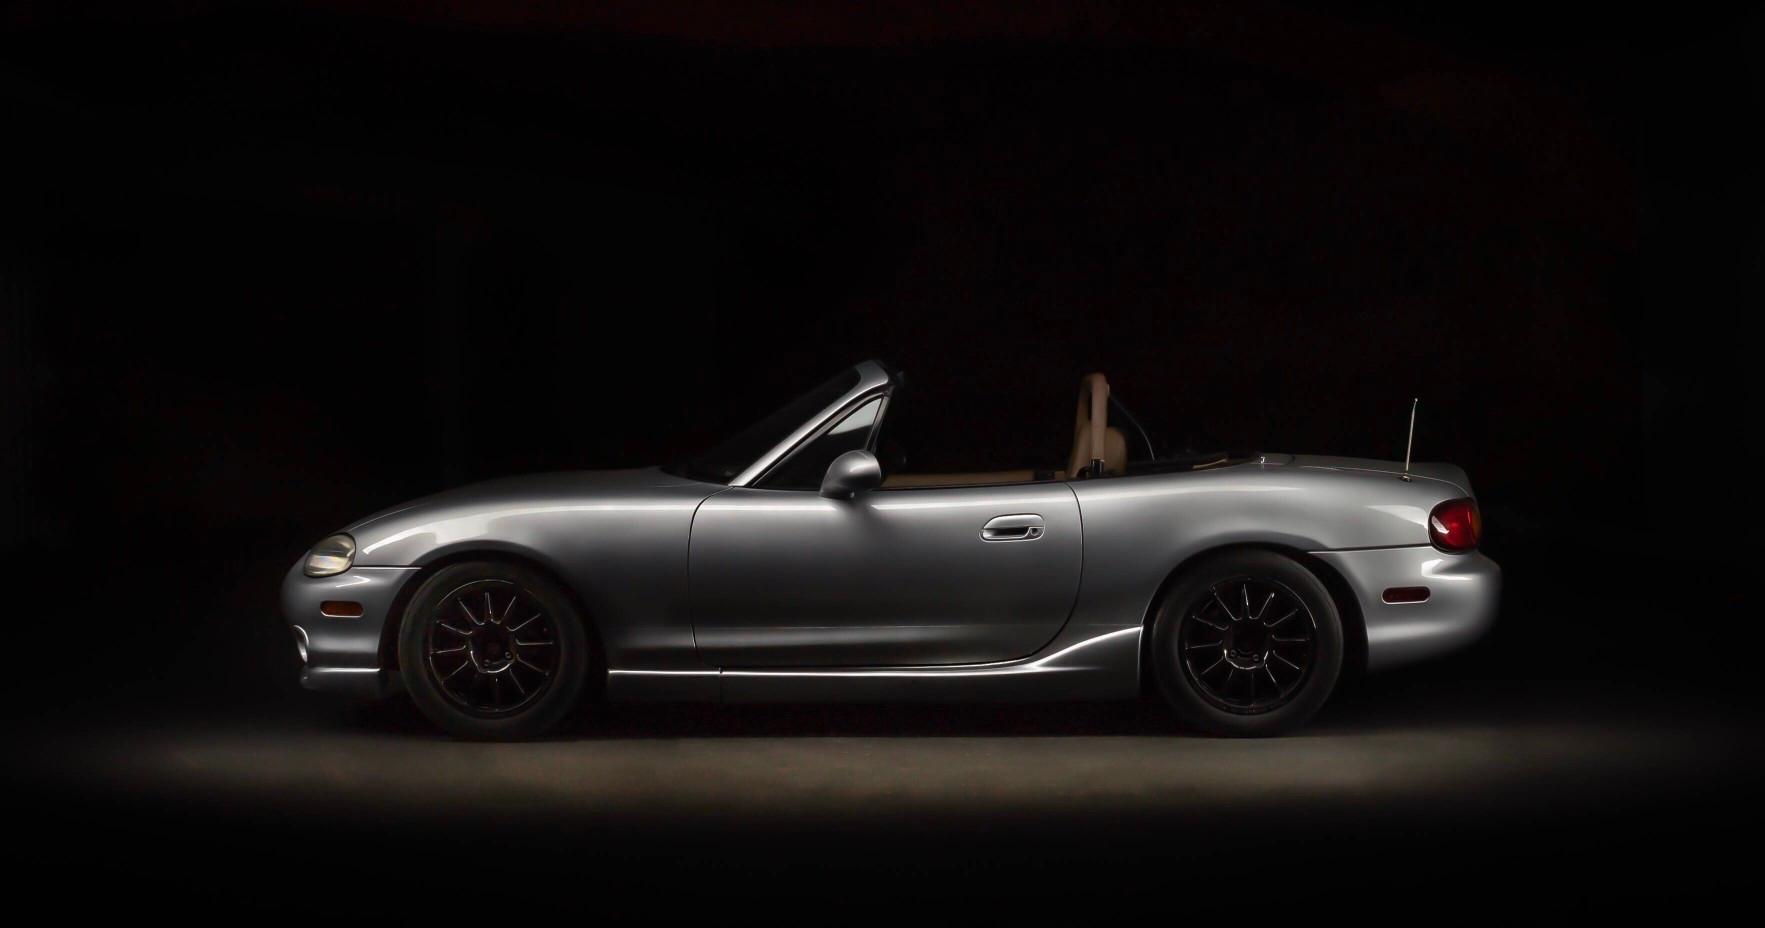 The 2021 Mazda MX-5 is one of the best-selling two-seat sports cars.